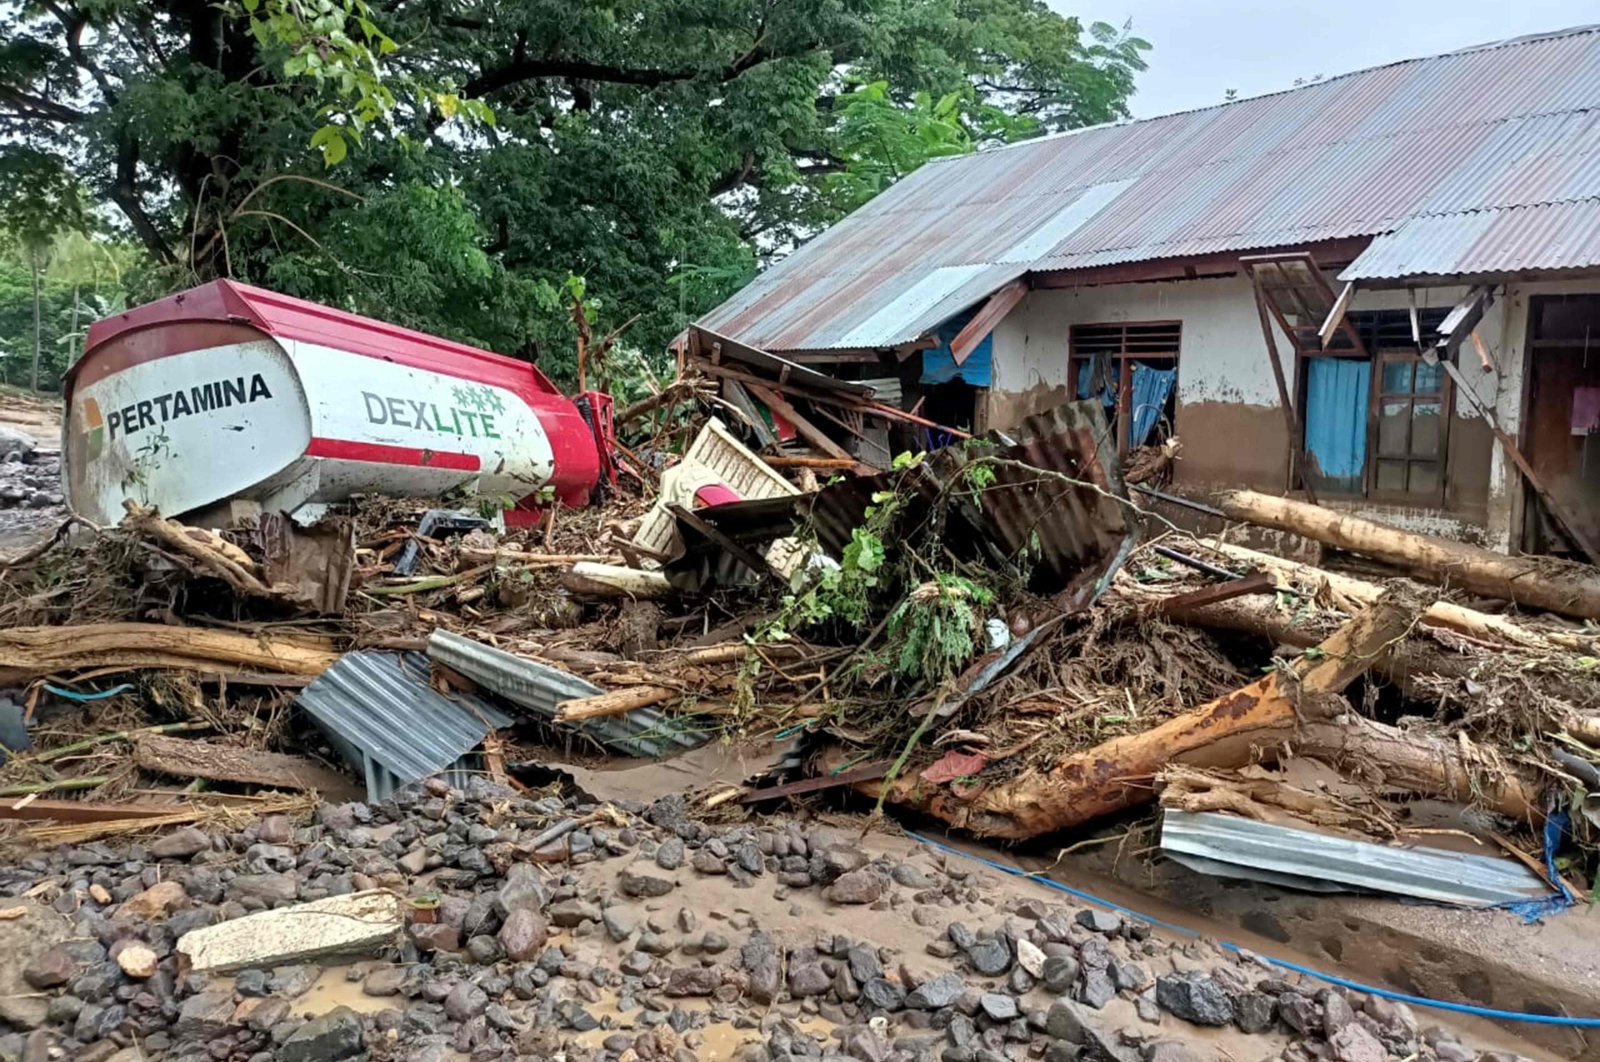 This general view shows debris left behind in the town of Adonara in East Flores on April 4, 2021, after flash floods and landslides swept eastern Indonesia and neighboring East Timor. (AFP Photo)